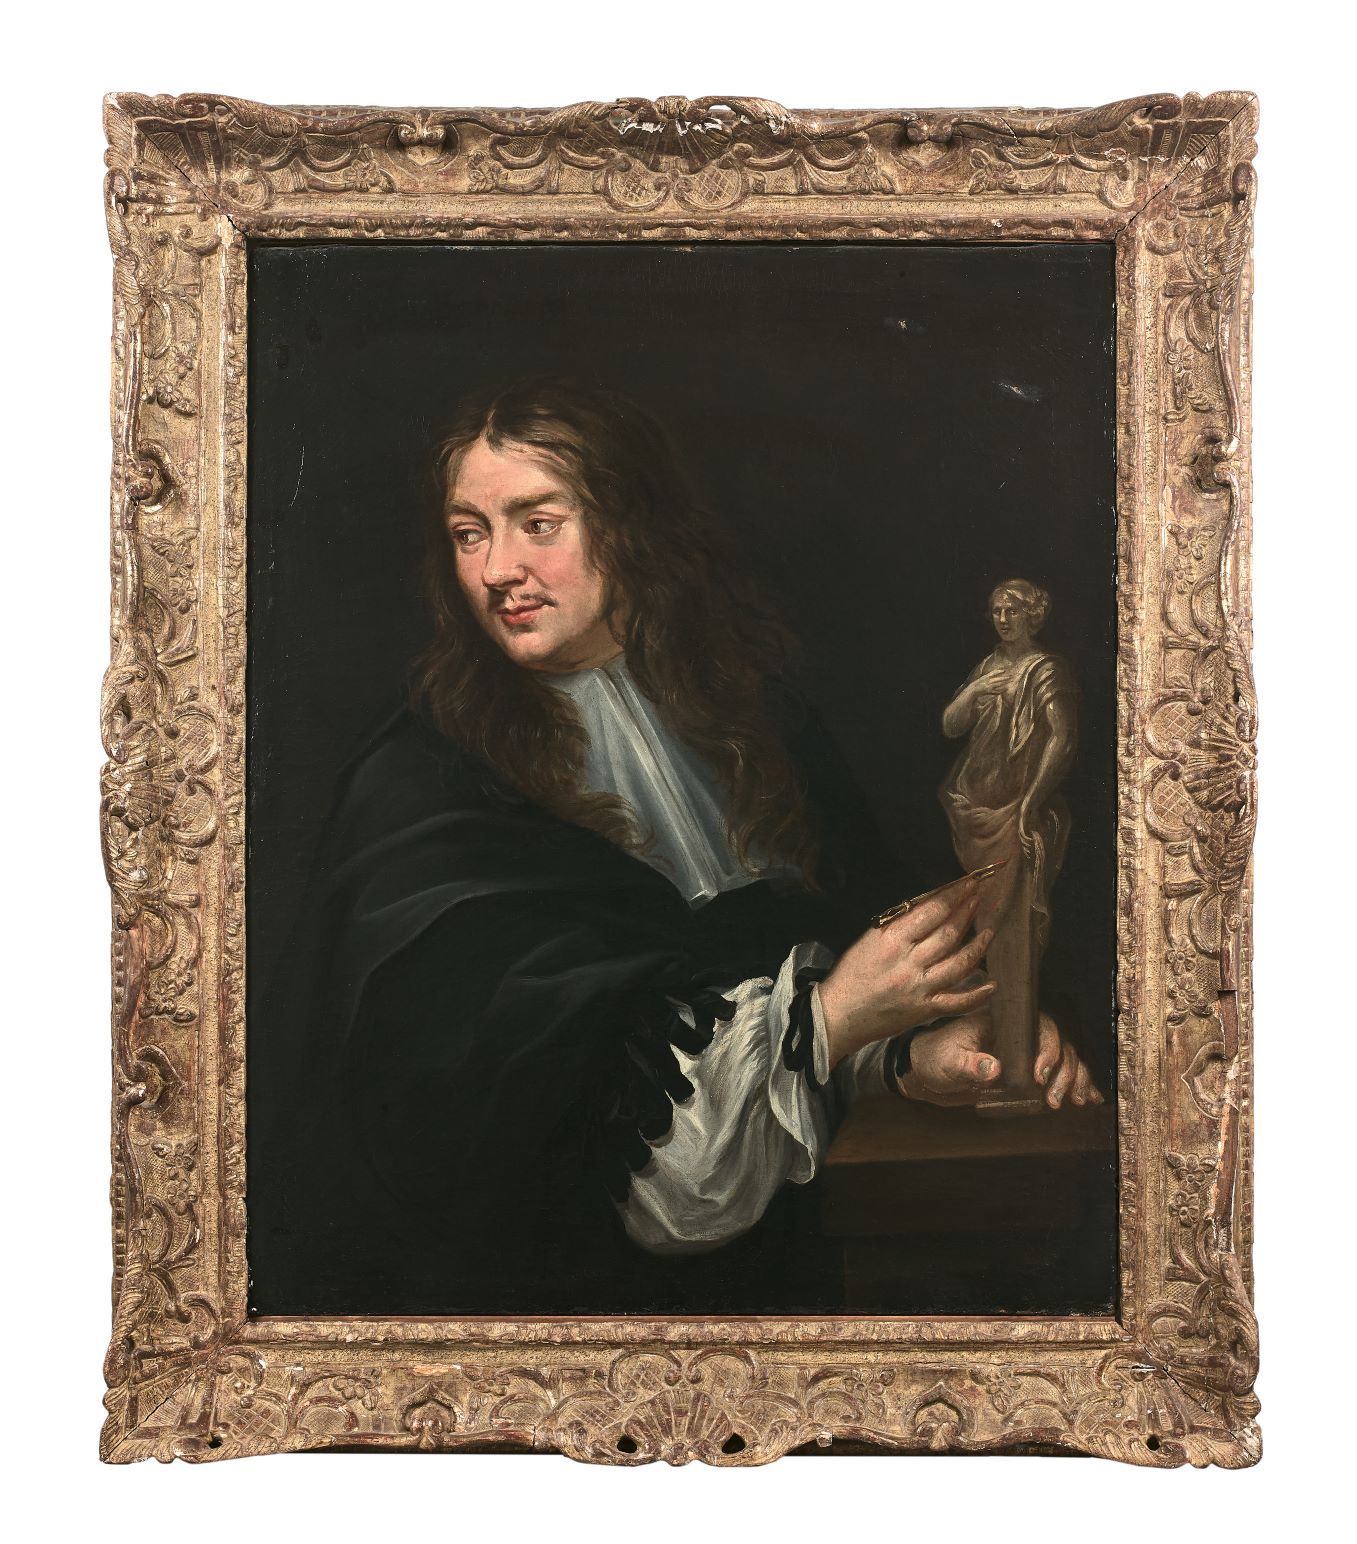 Null French School circa 1660

Portrait of a sculptor holding a term model

Canv&hellip;